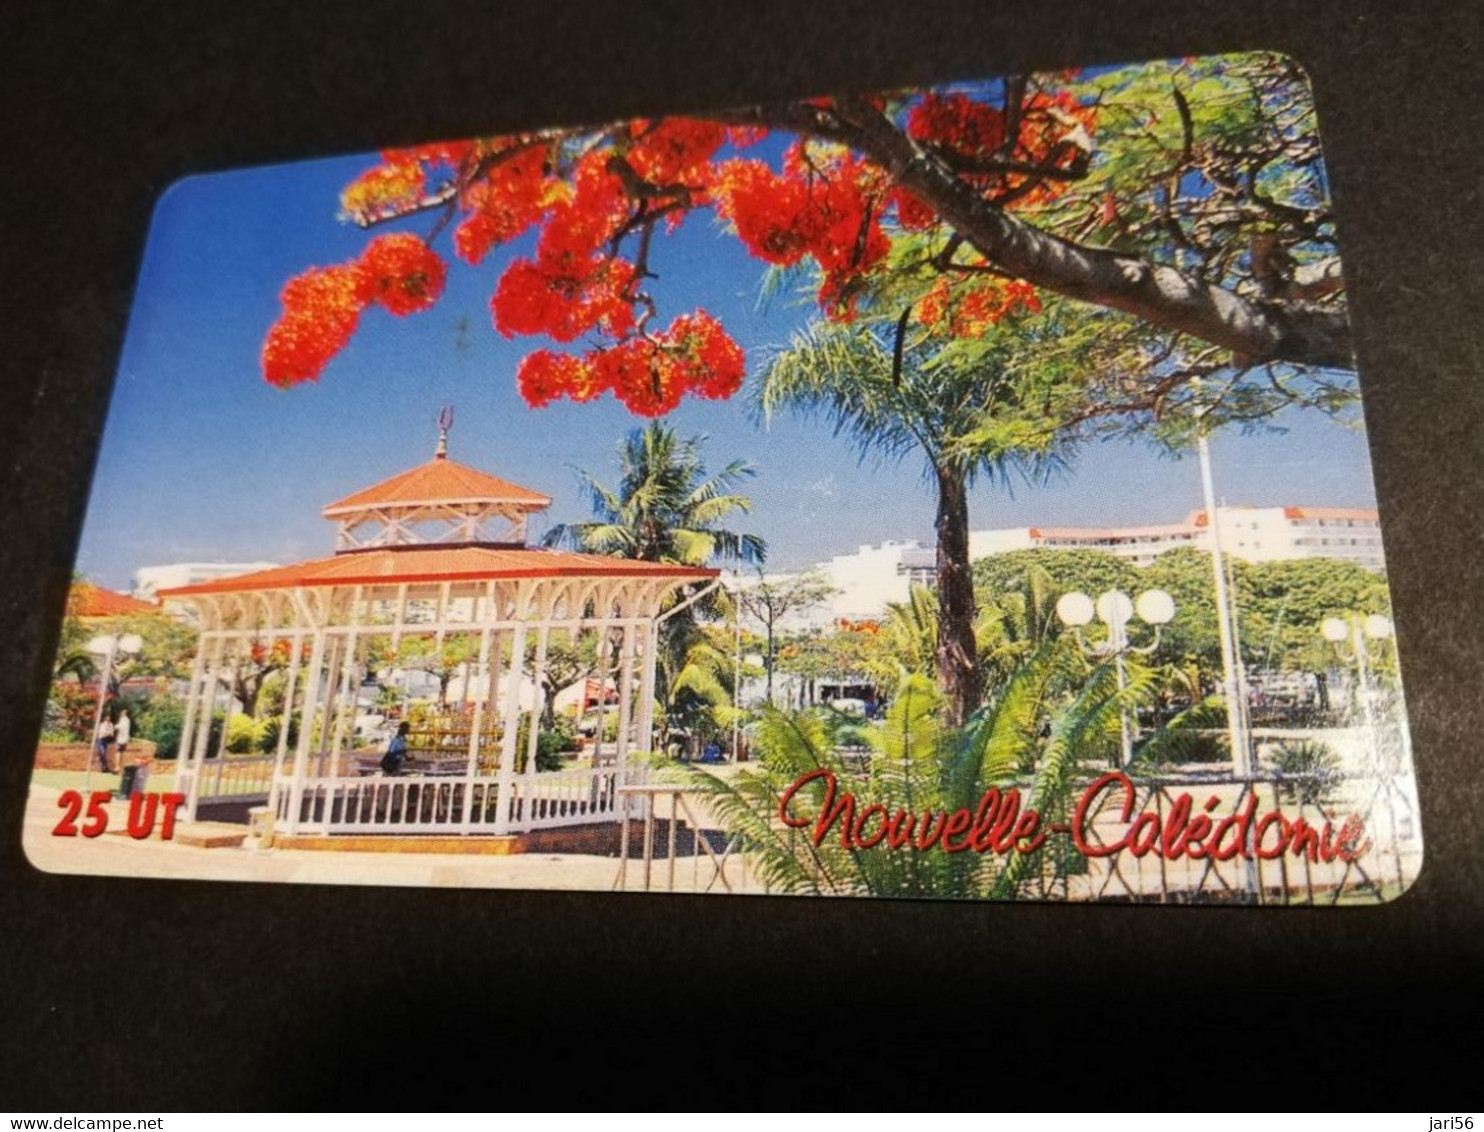 NOUVELLE CALEDONIA  CHIP CARD 25  UNITS  KIOSQUE A MUSIC AND FLOWERS IN TREE       ** 4195 ** - Nouvelle-Calédonie